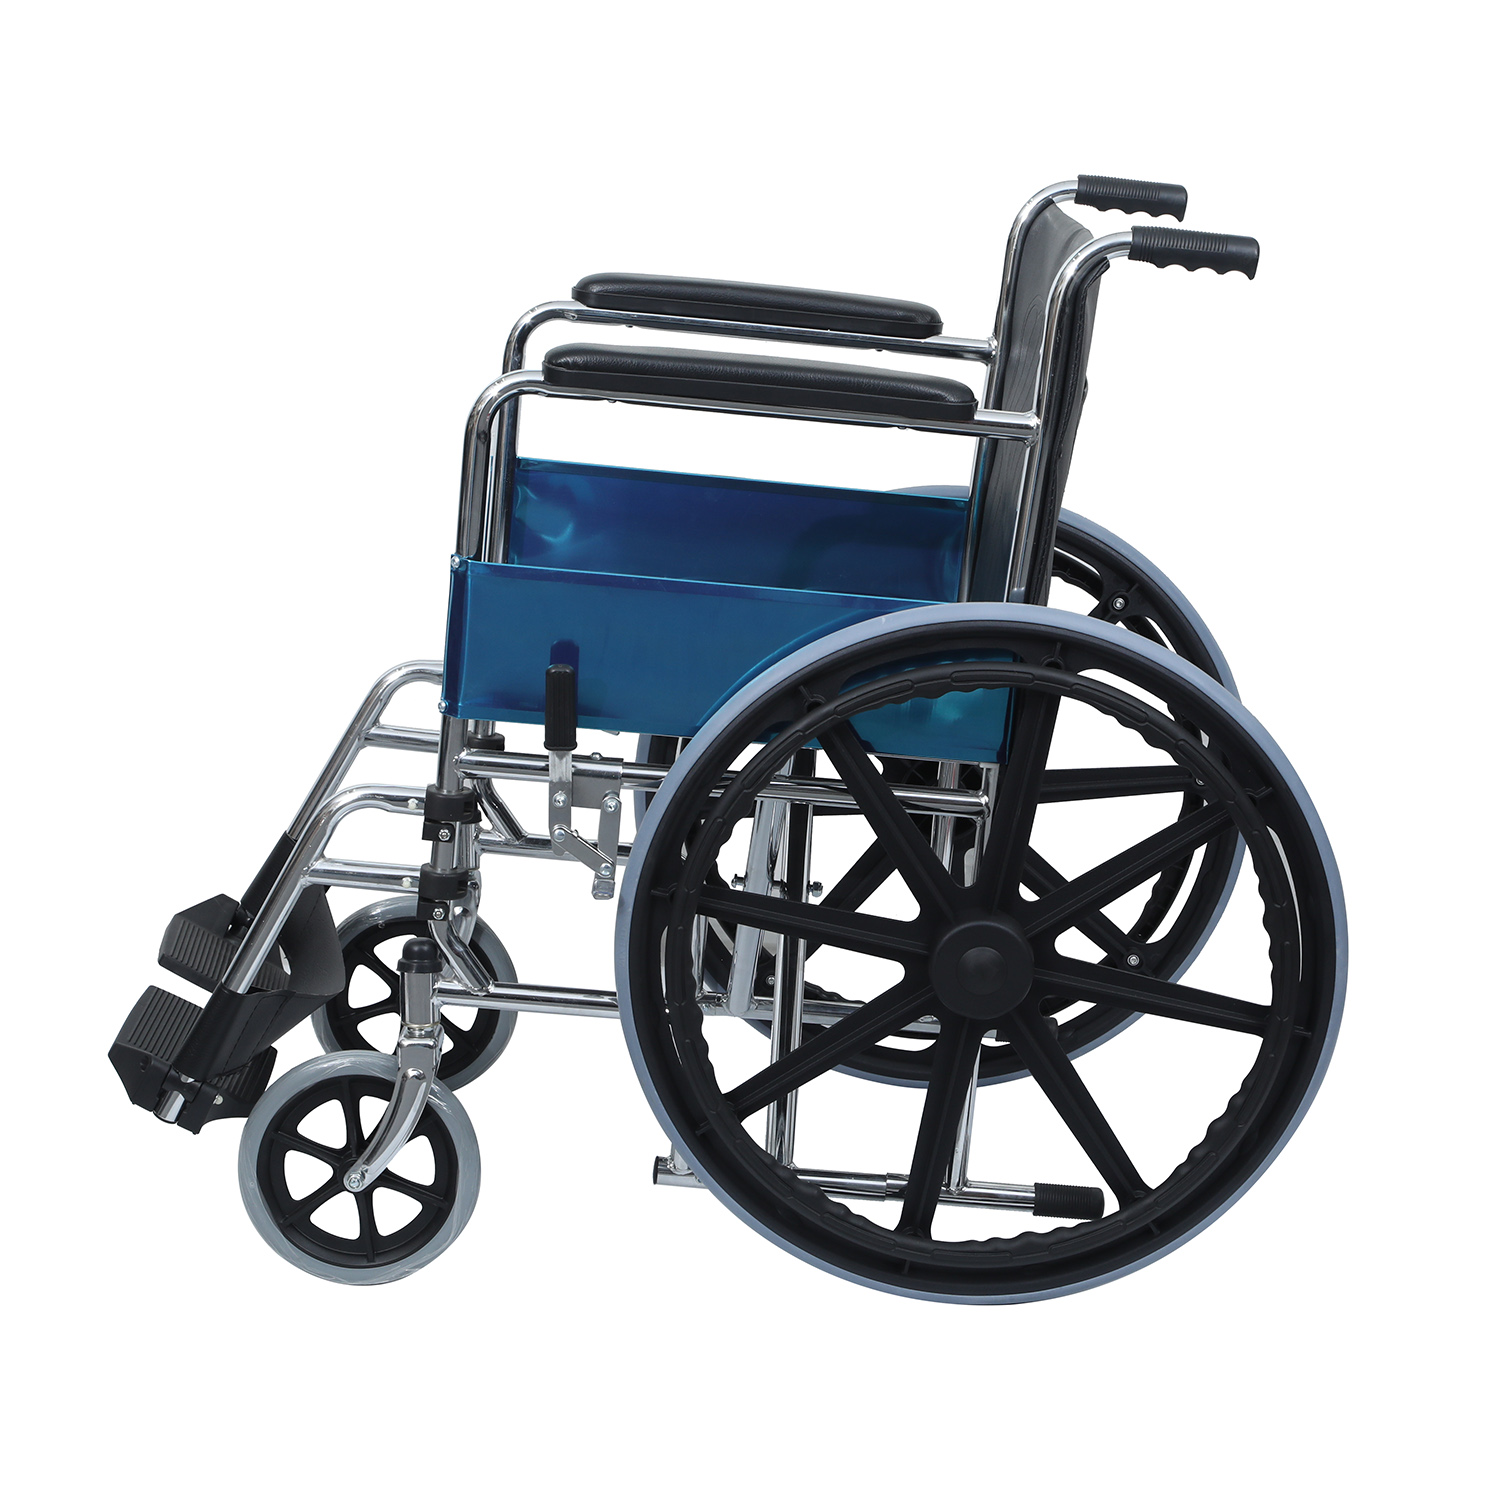 Some training to help patients better use wheelchairs